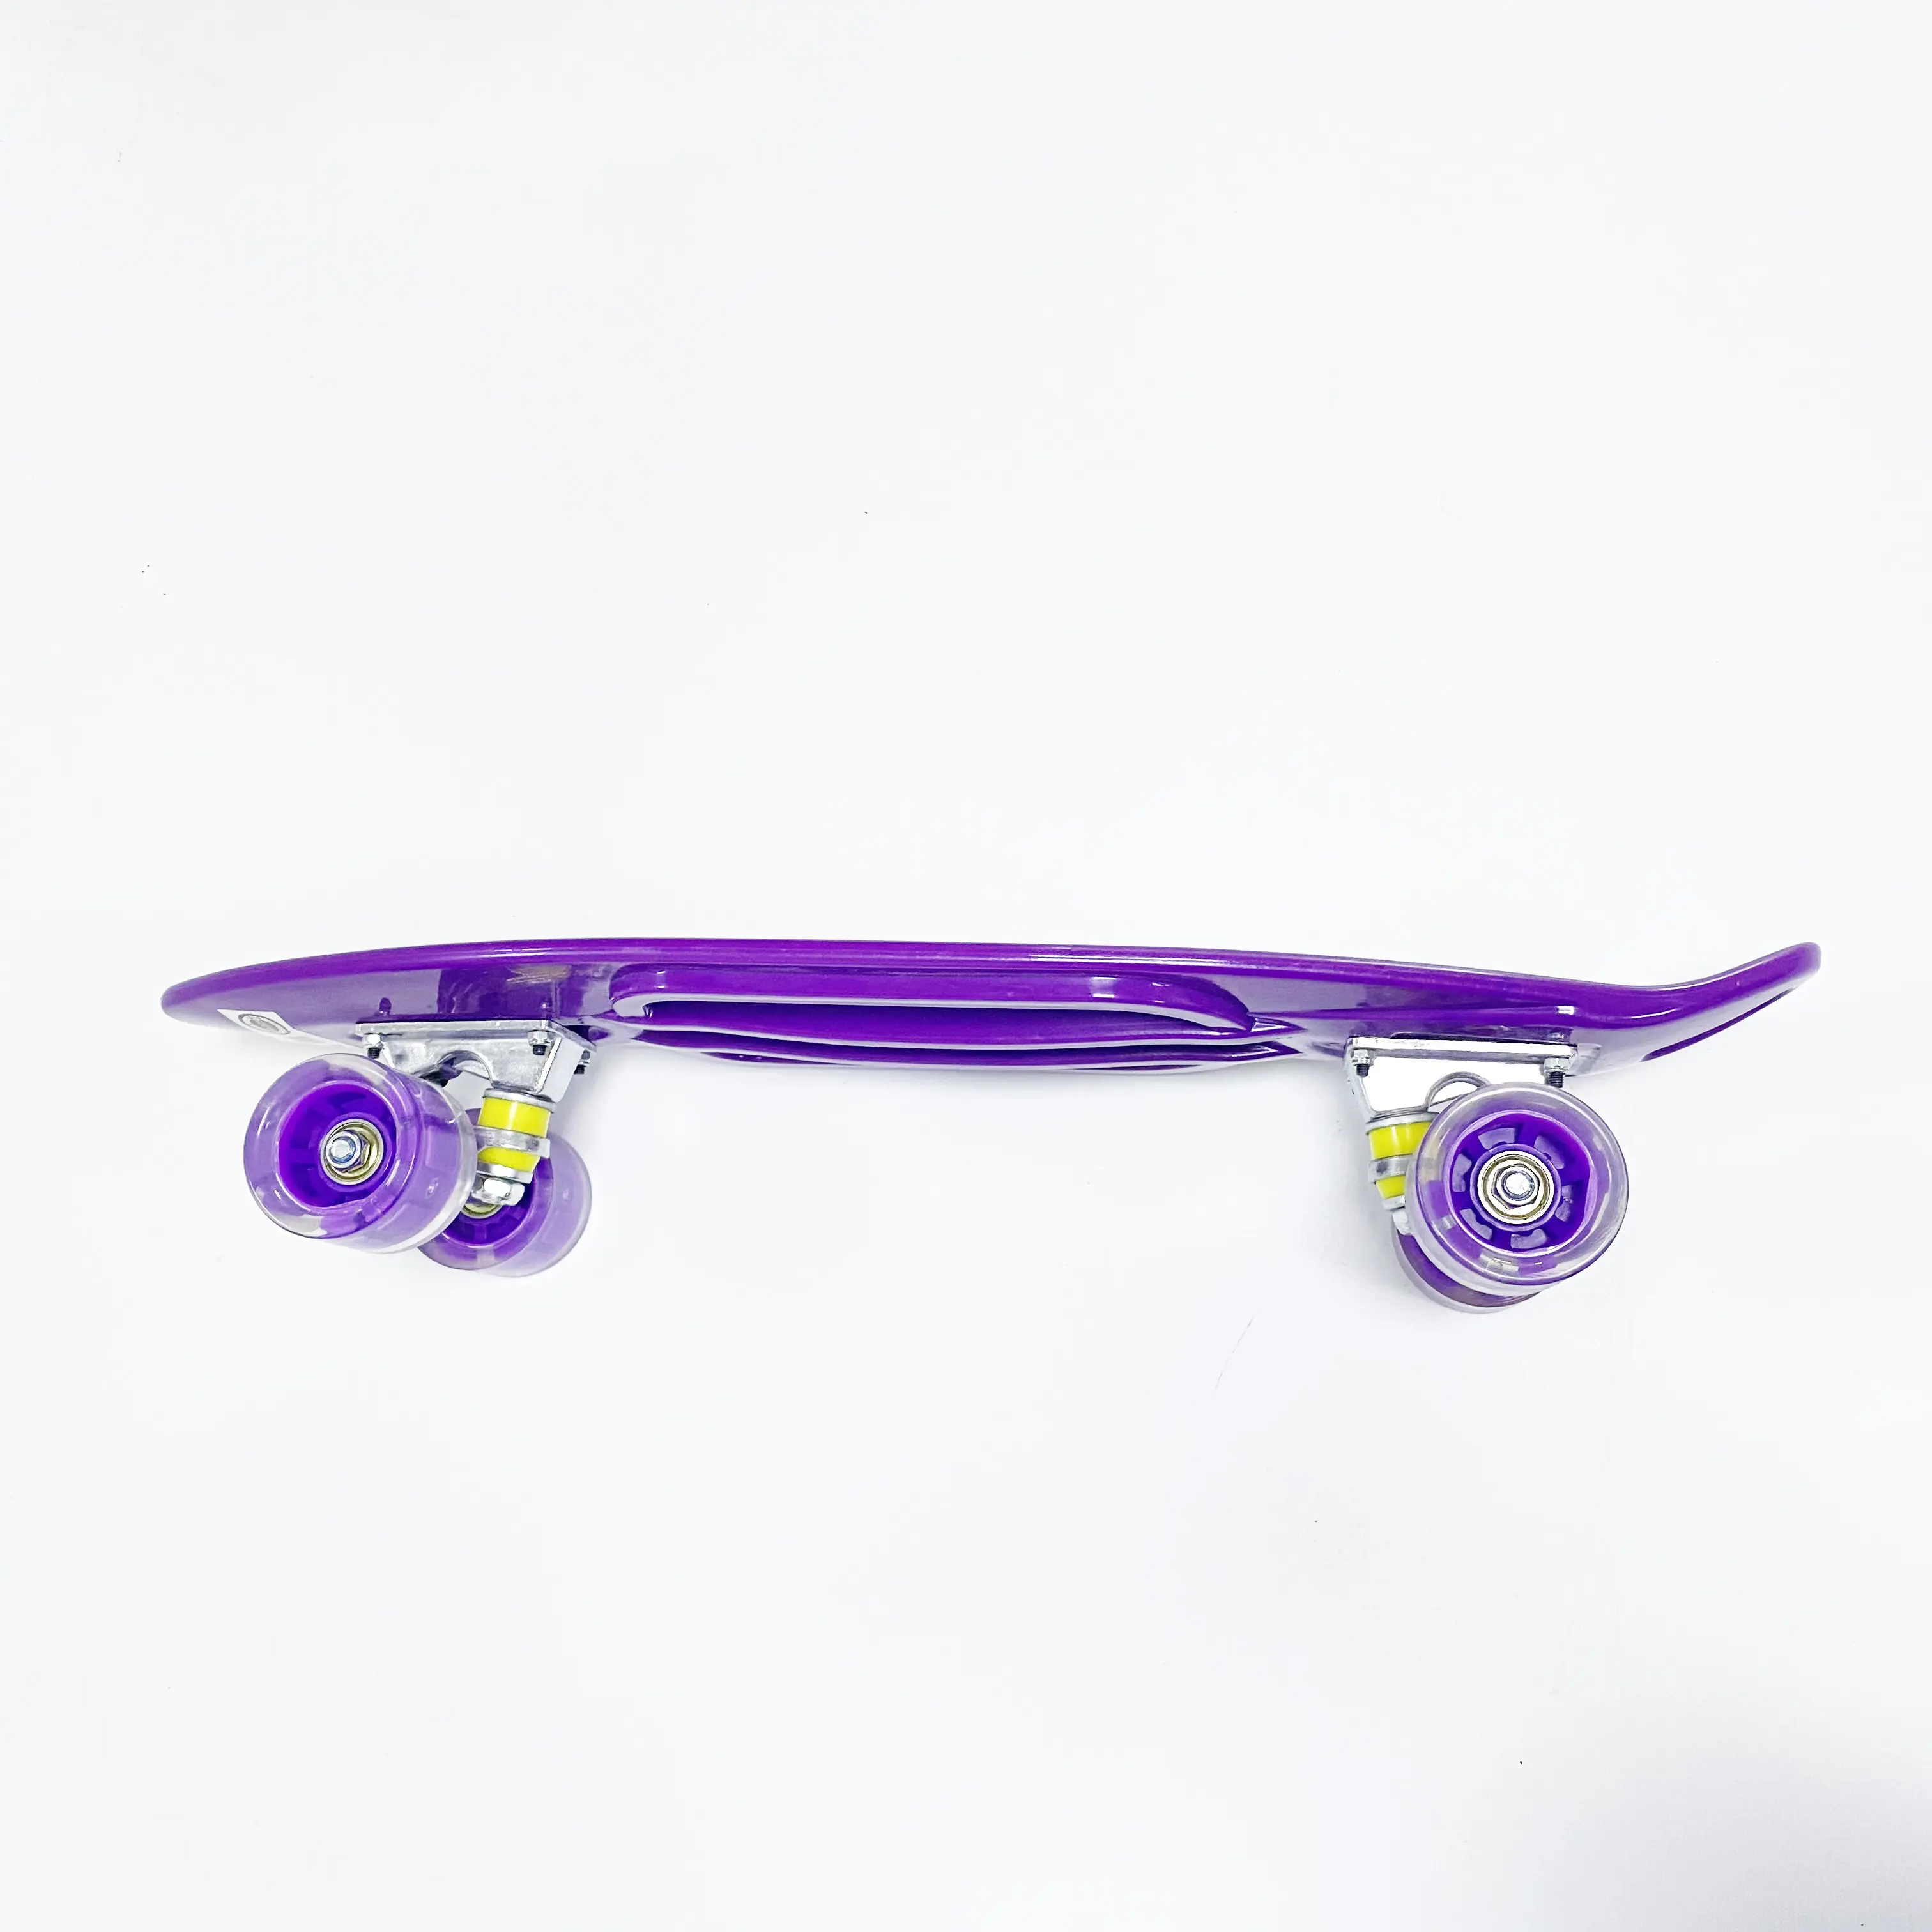 Magic color PP printable board Customized professional 22 inch PP skateboard with flashing wheels high quality